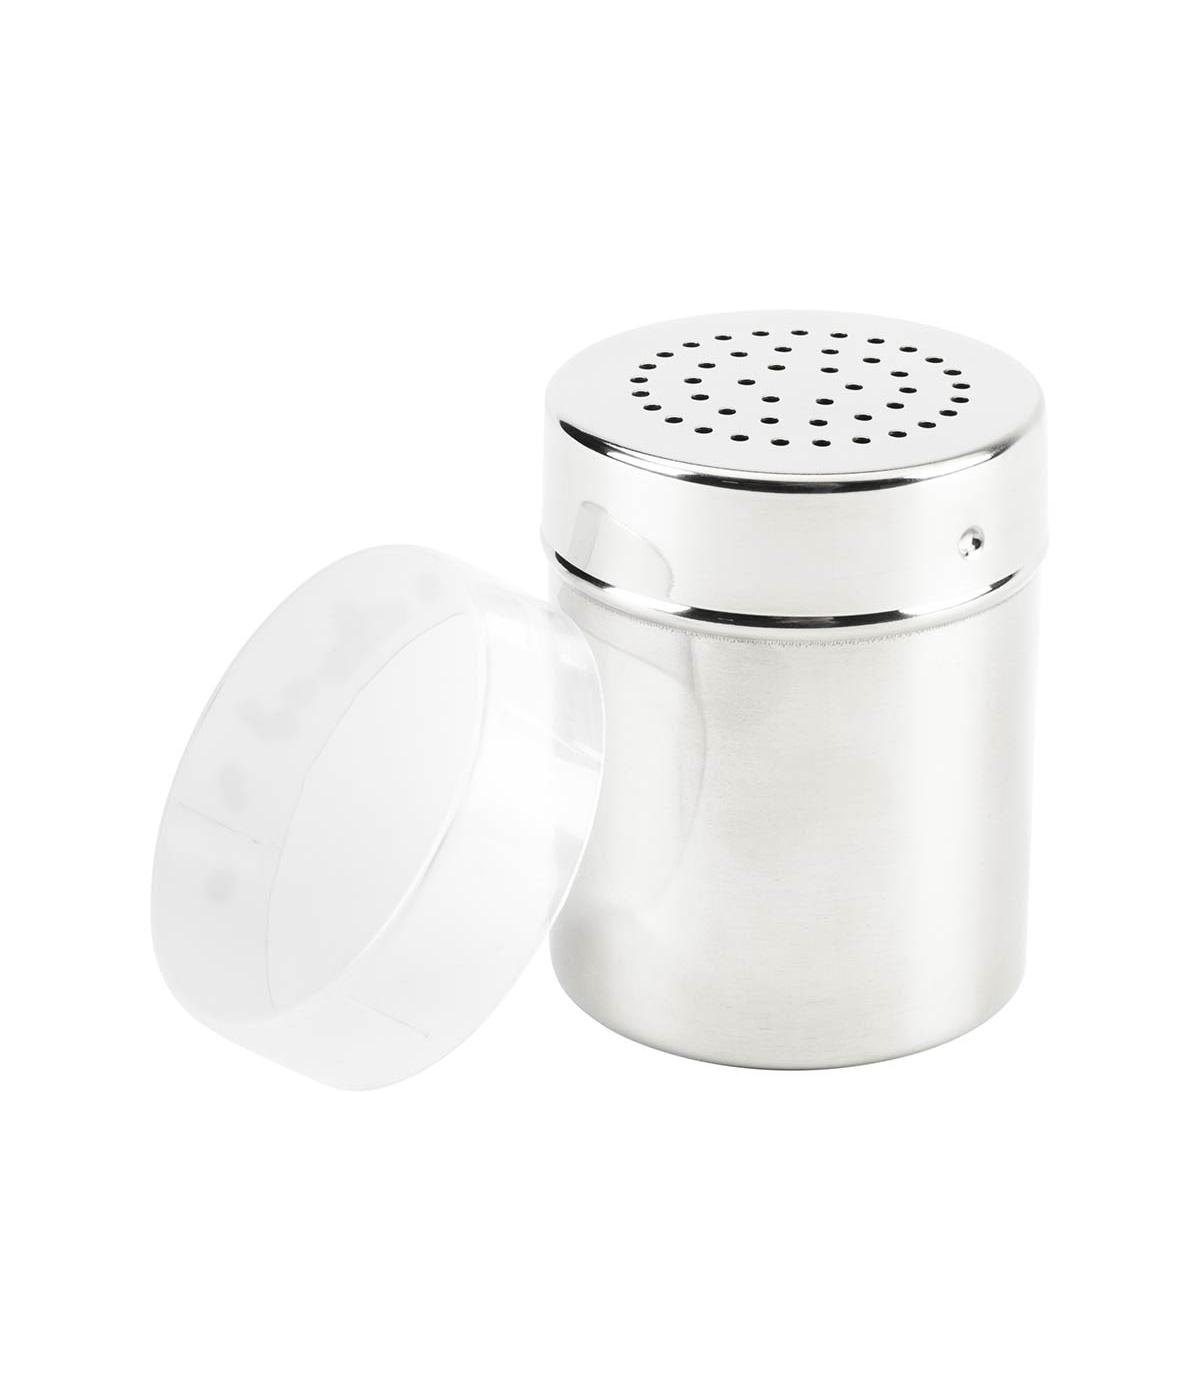 GoodCook Stainless Steel All Purpose Kitchen Shaker; image 2 of 3